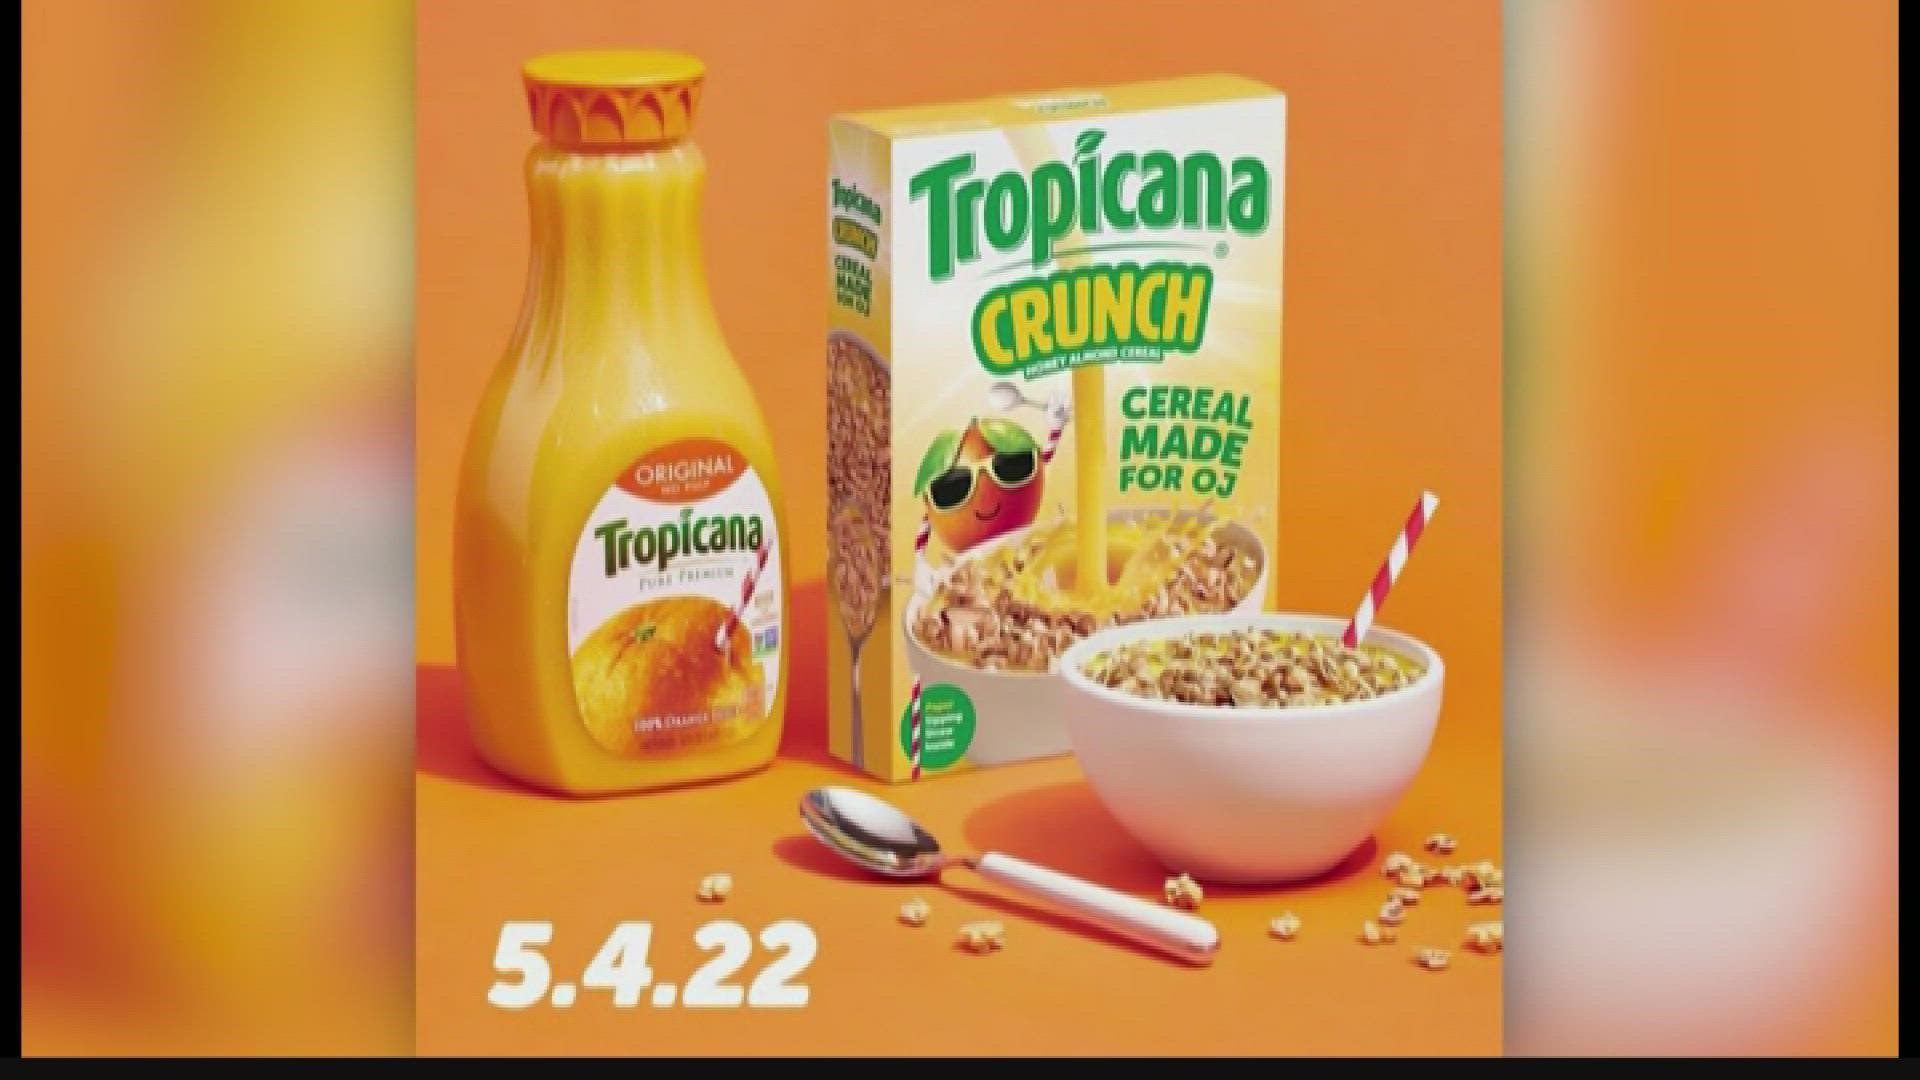 A new cereal that doesn't require milk. All this one needs is a big bowl of OJ.